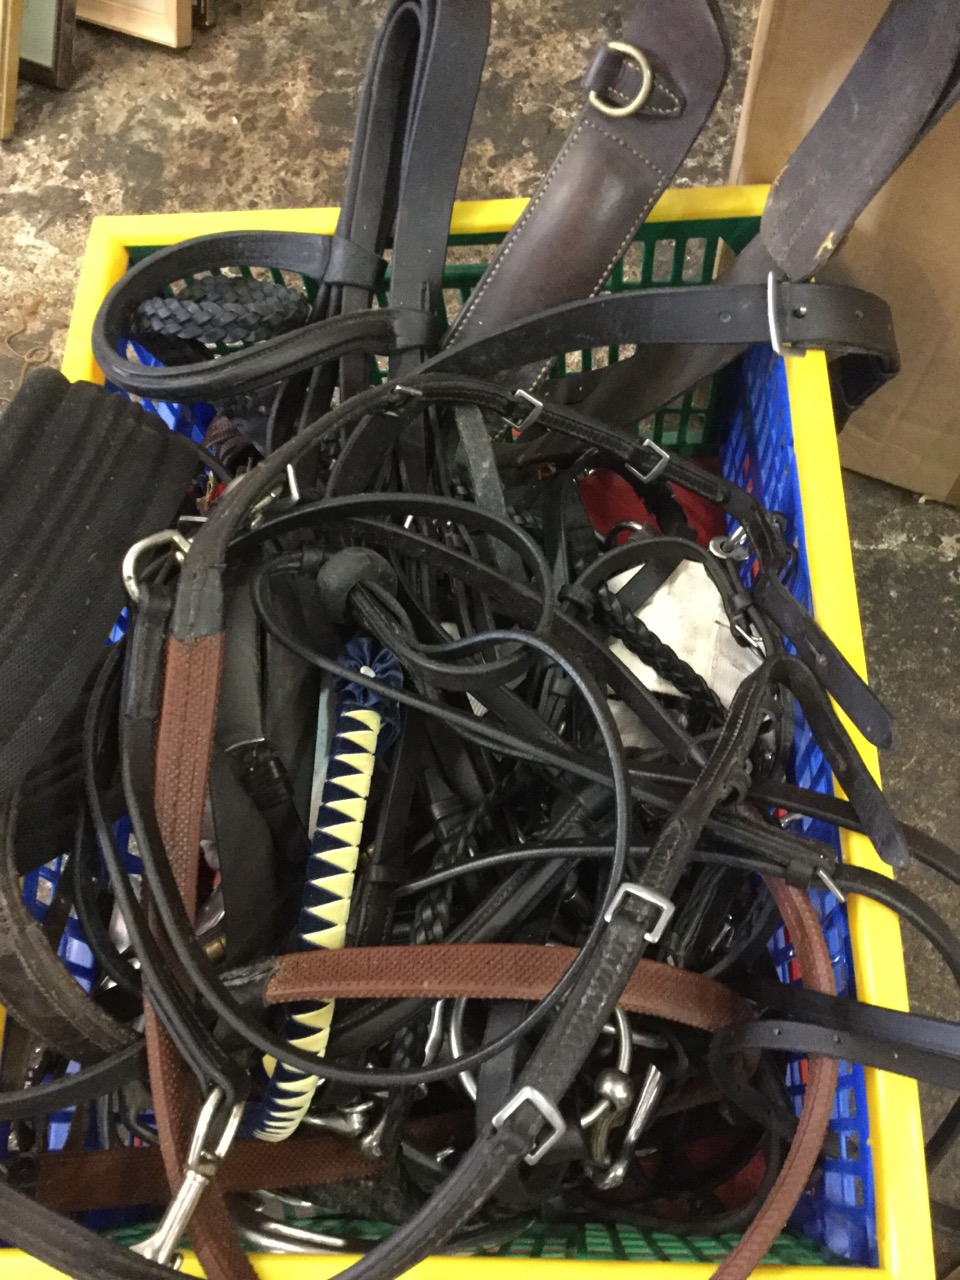 A quantity of horse tack - complete bridles, stirrups, girths, surcingles, brow bands, etc. (A lot)